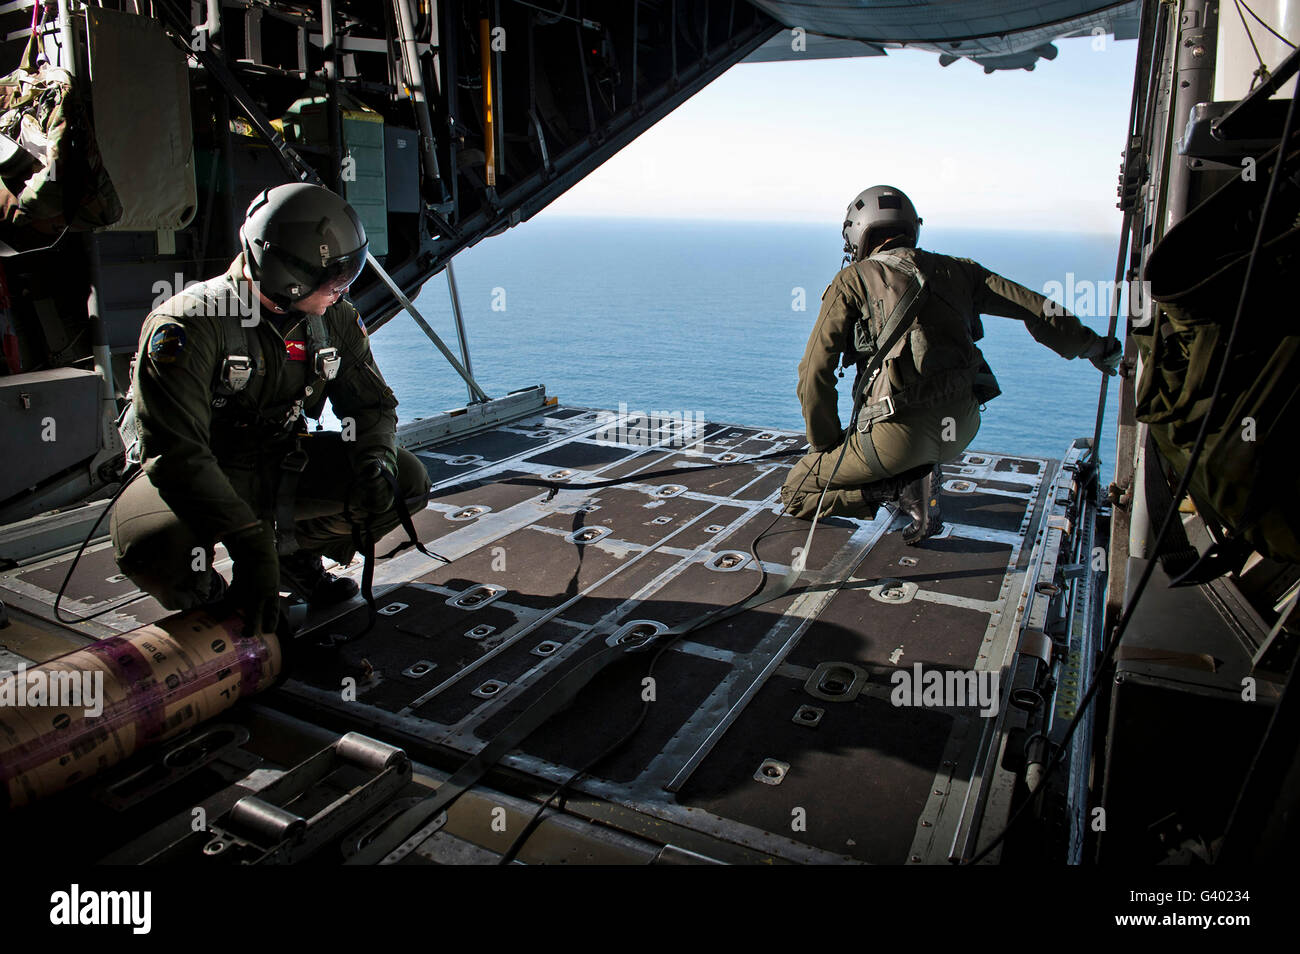 Airmen wait for the signal to deploy a buoy from a C-130 Hercules. Stock Photo